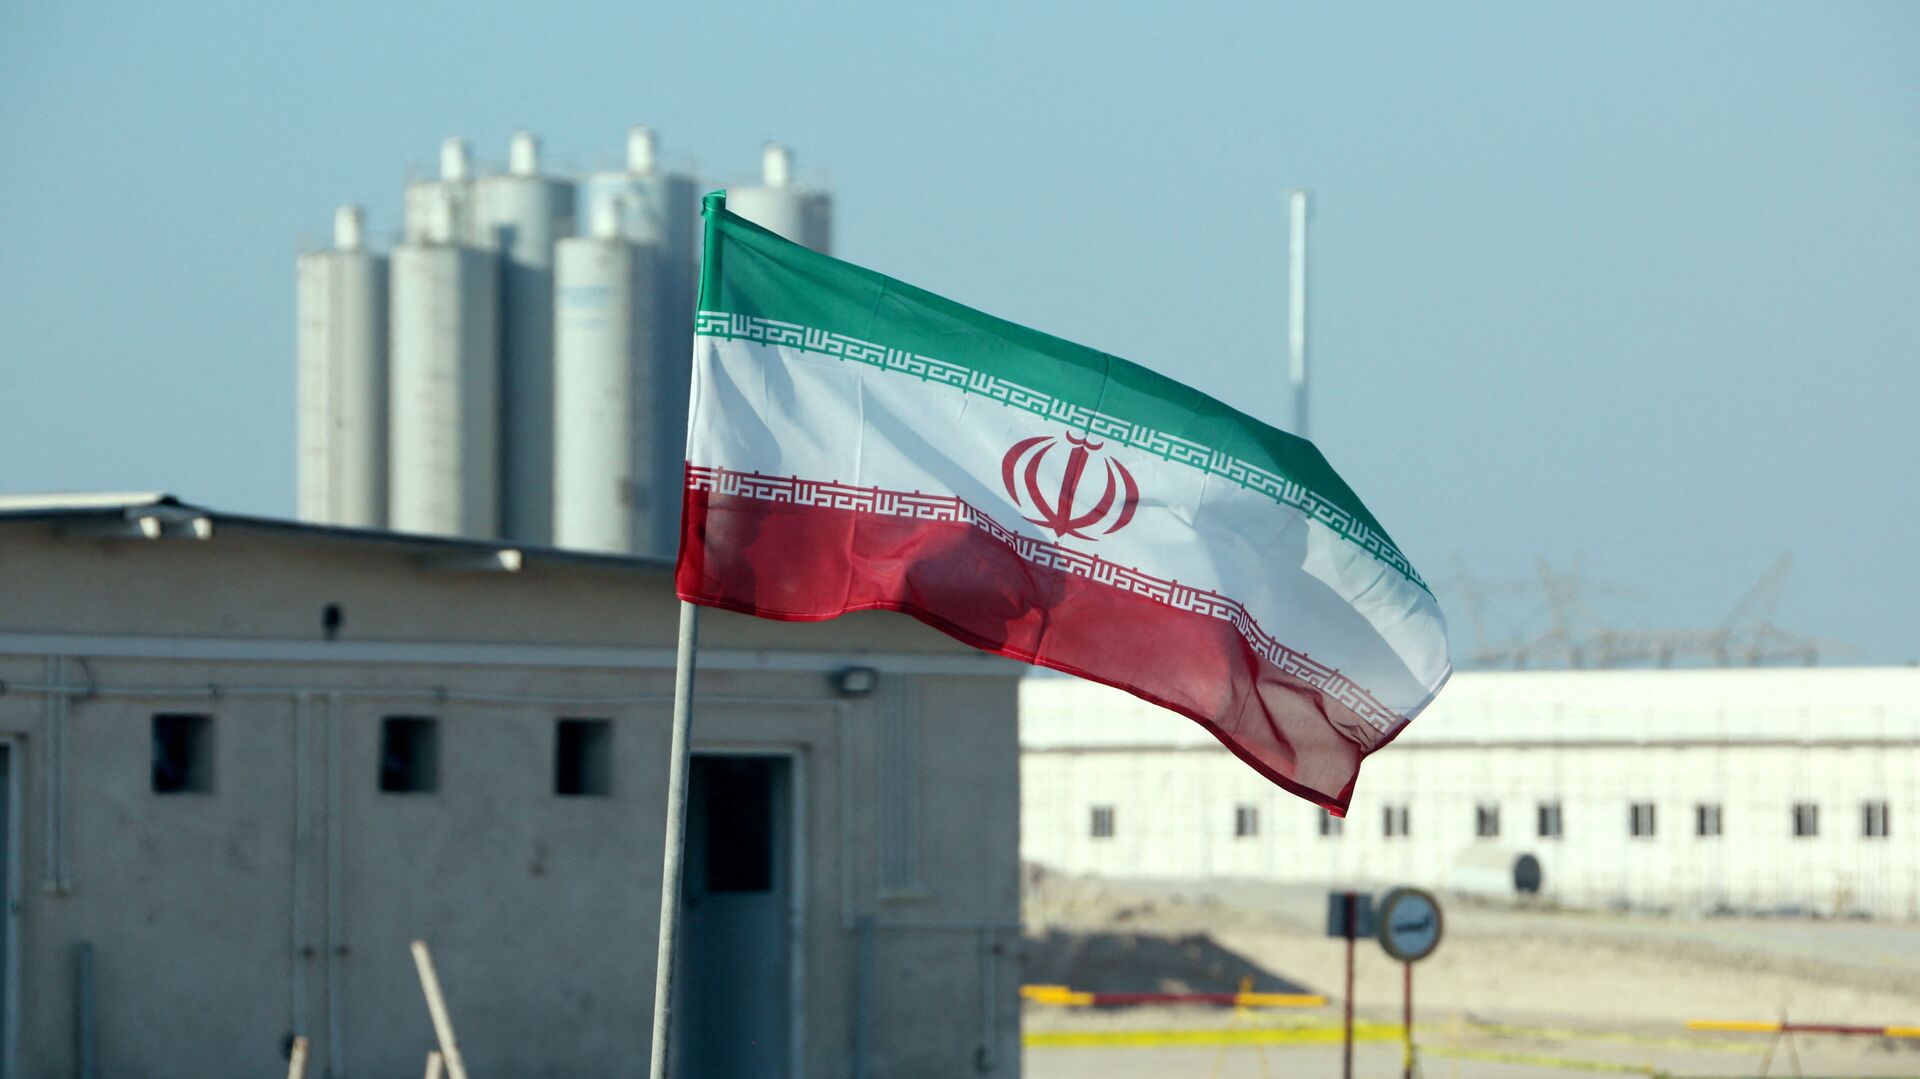 A picture taken on November 10, 2019, shows an Iranian flag in Iran's Bushehr nuclear power plant, during an official ceremony to kick-start works on a second reactor at the facility - Sputnik International, 1920, 22.01.2022